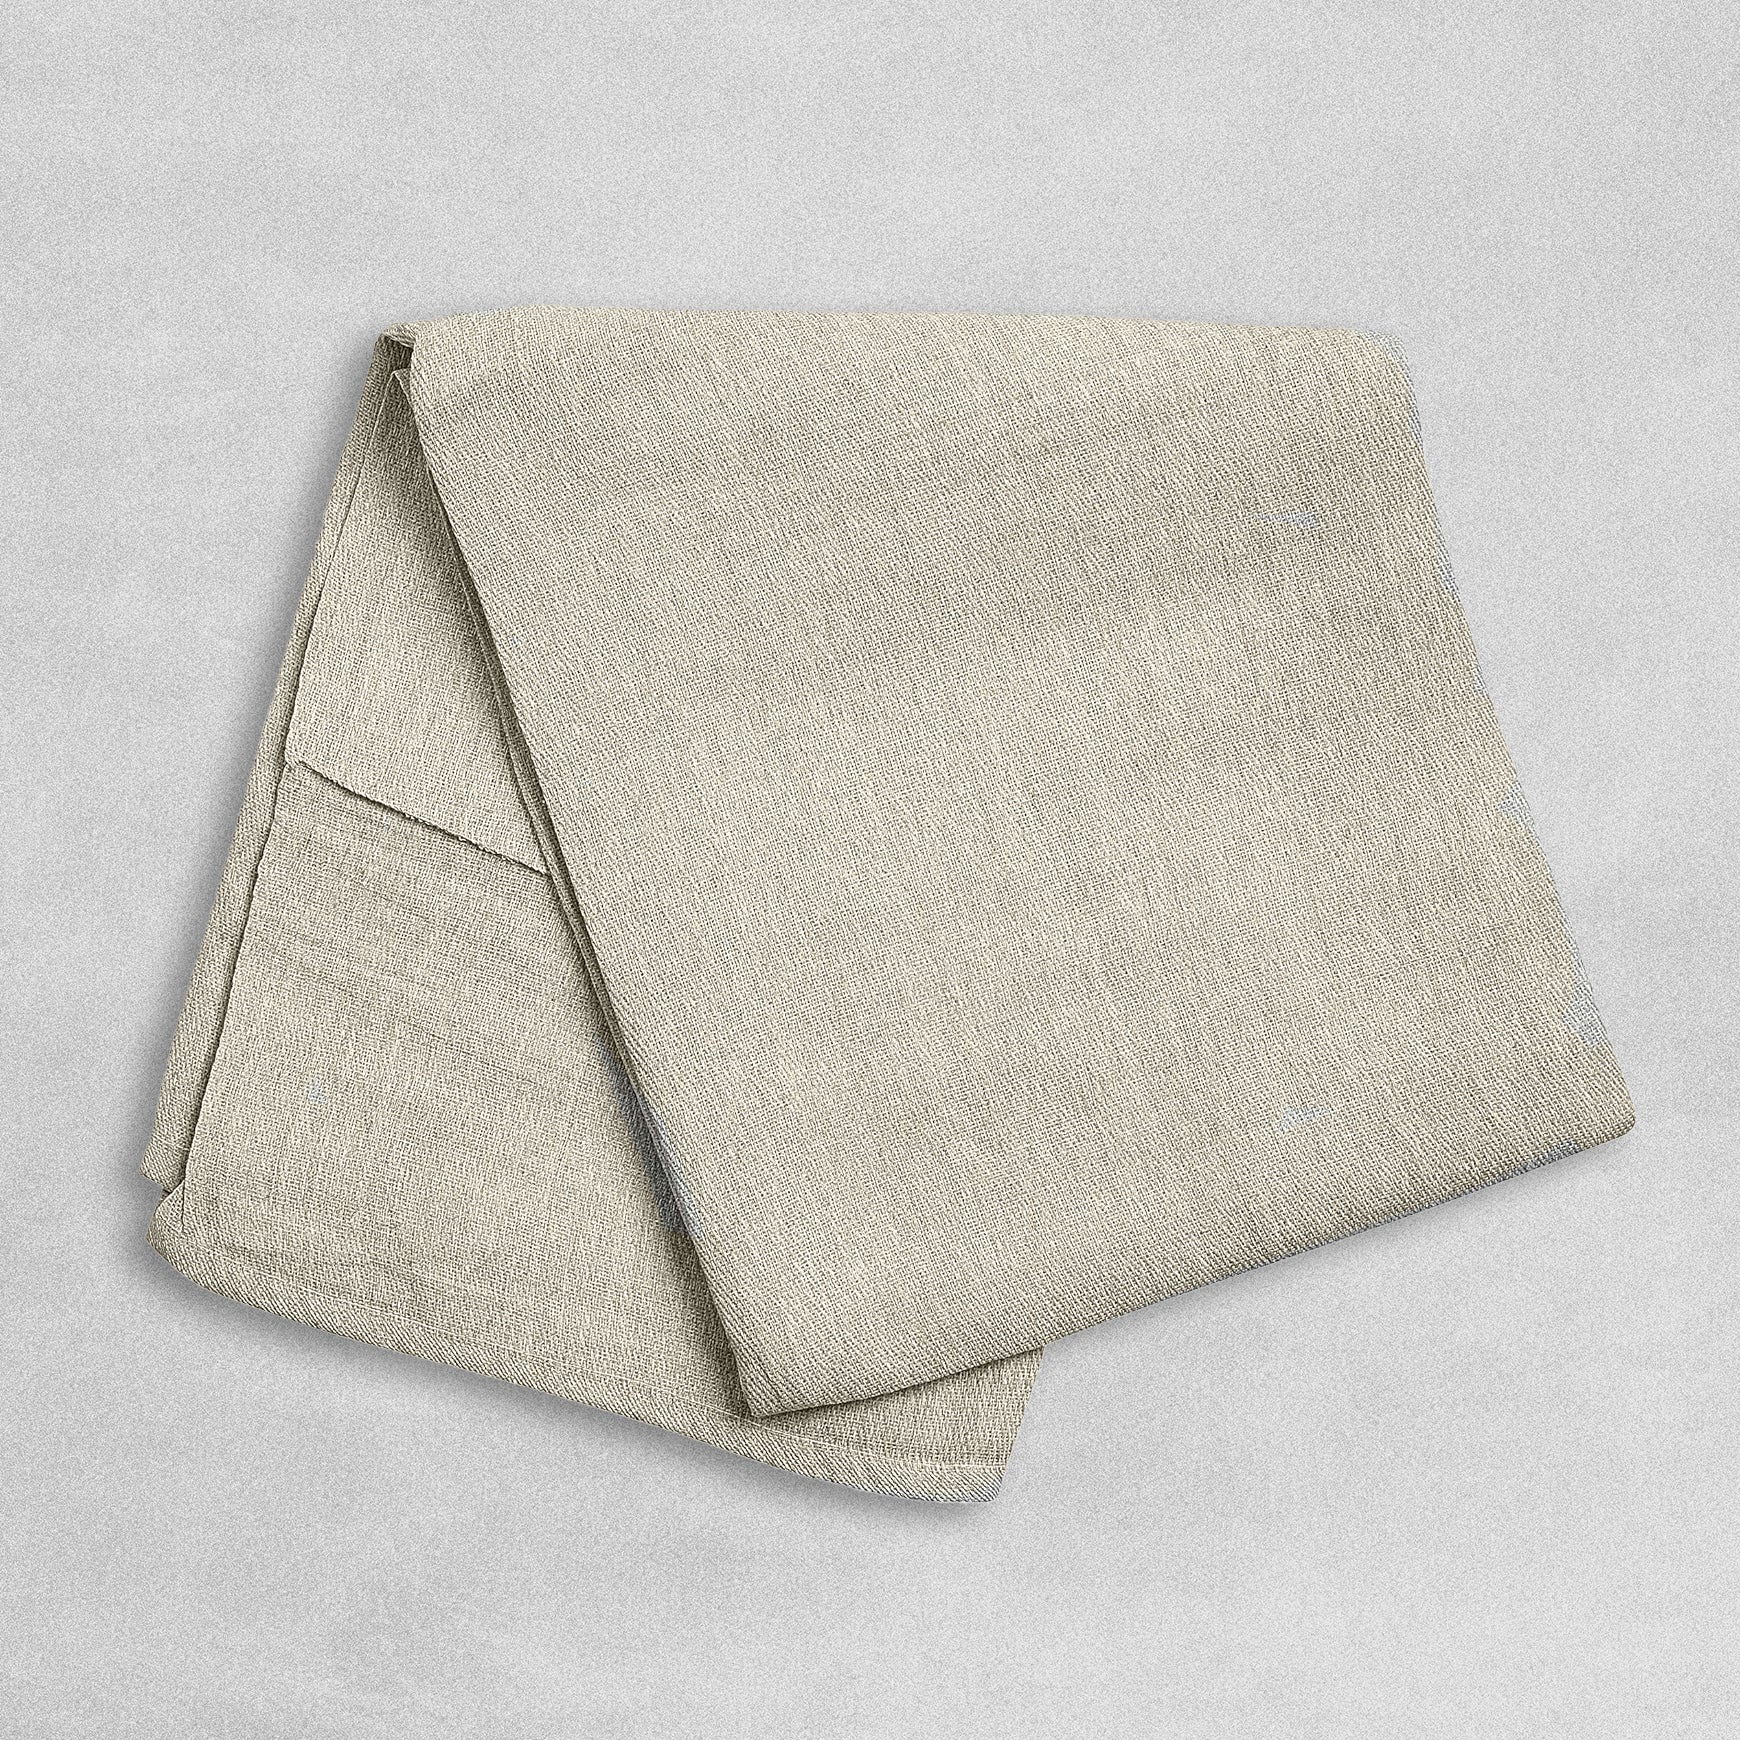 Harris 'Seriously Good' Double Protection Cotton Dust Sheet